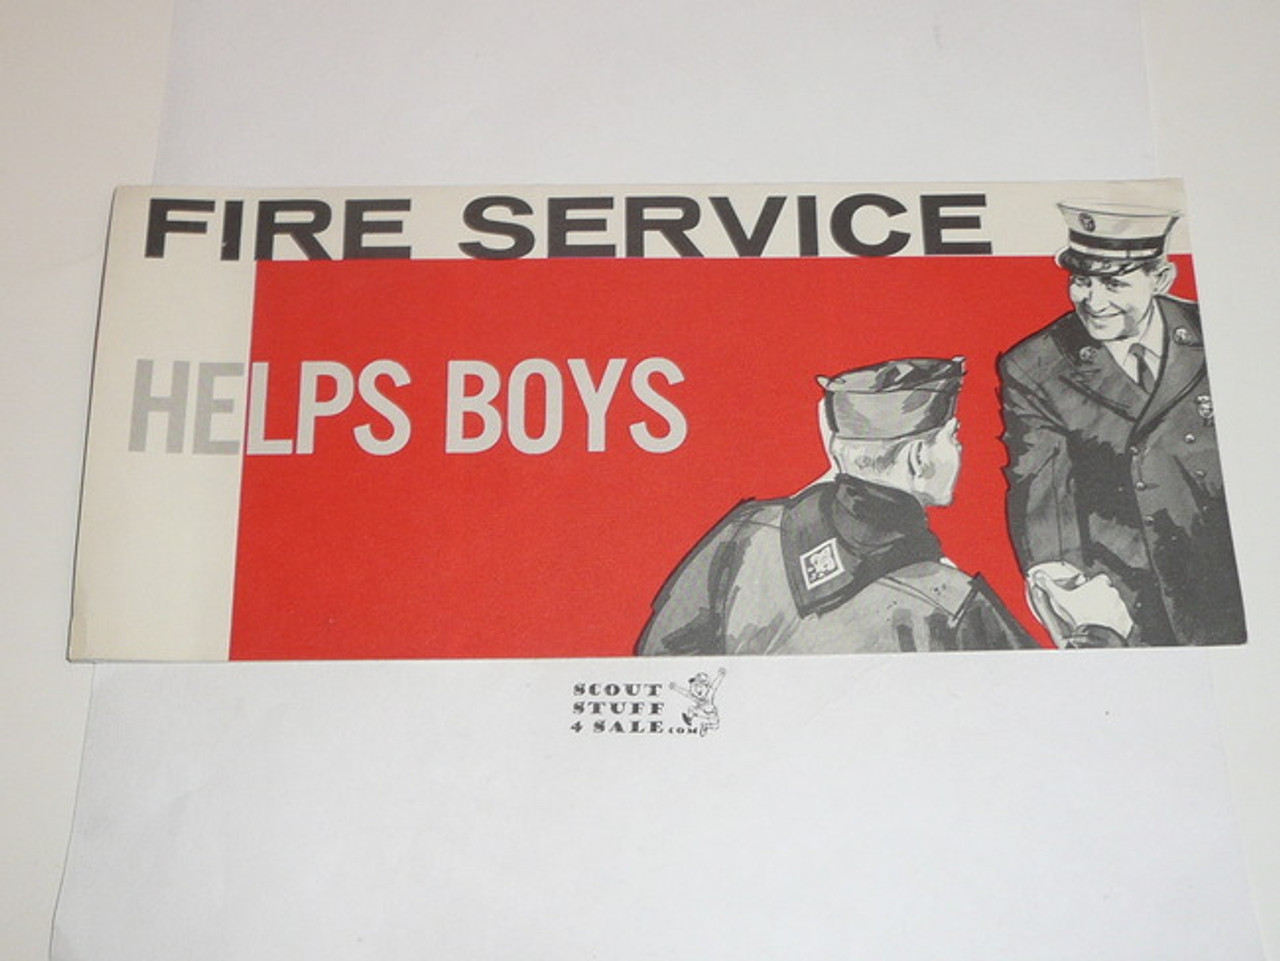 1960's Fire Service Helps Boys, Partnership with the Boy Scouts of America